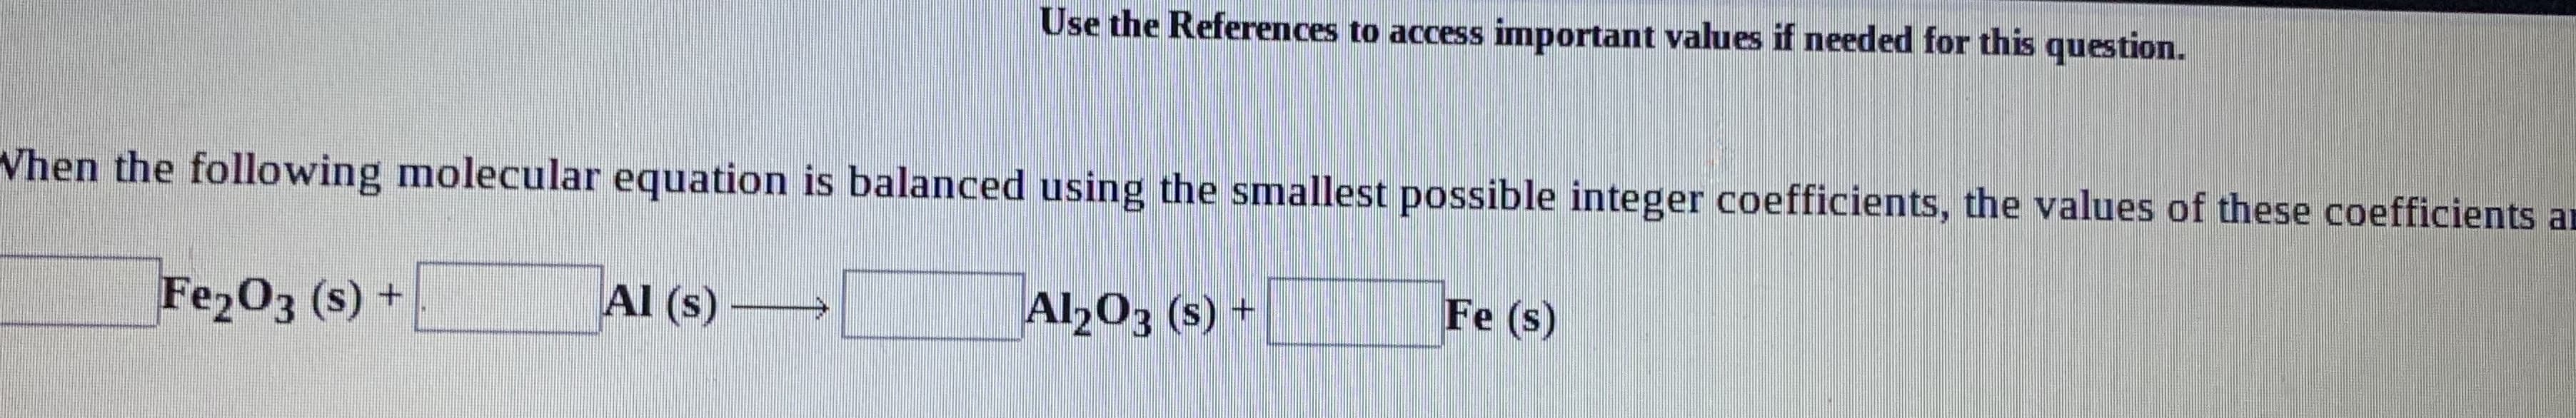 Use the References to access important values if needed for this question.
When the following molecular equation is balanced using the smallest possible integer coefficients, the values of these coefficients ar
Fe2O3 (s) +
Al (s)
Al203 (s) +
Fe (s)
